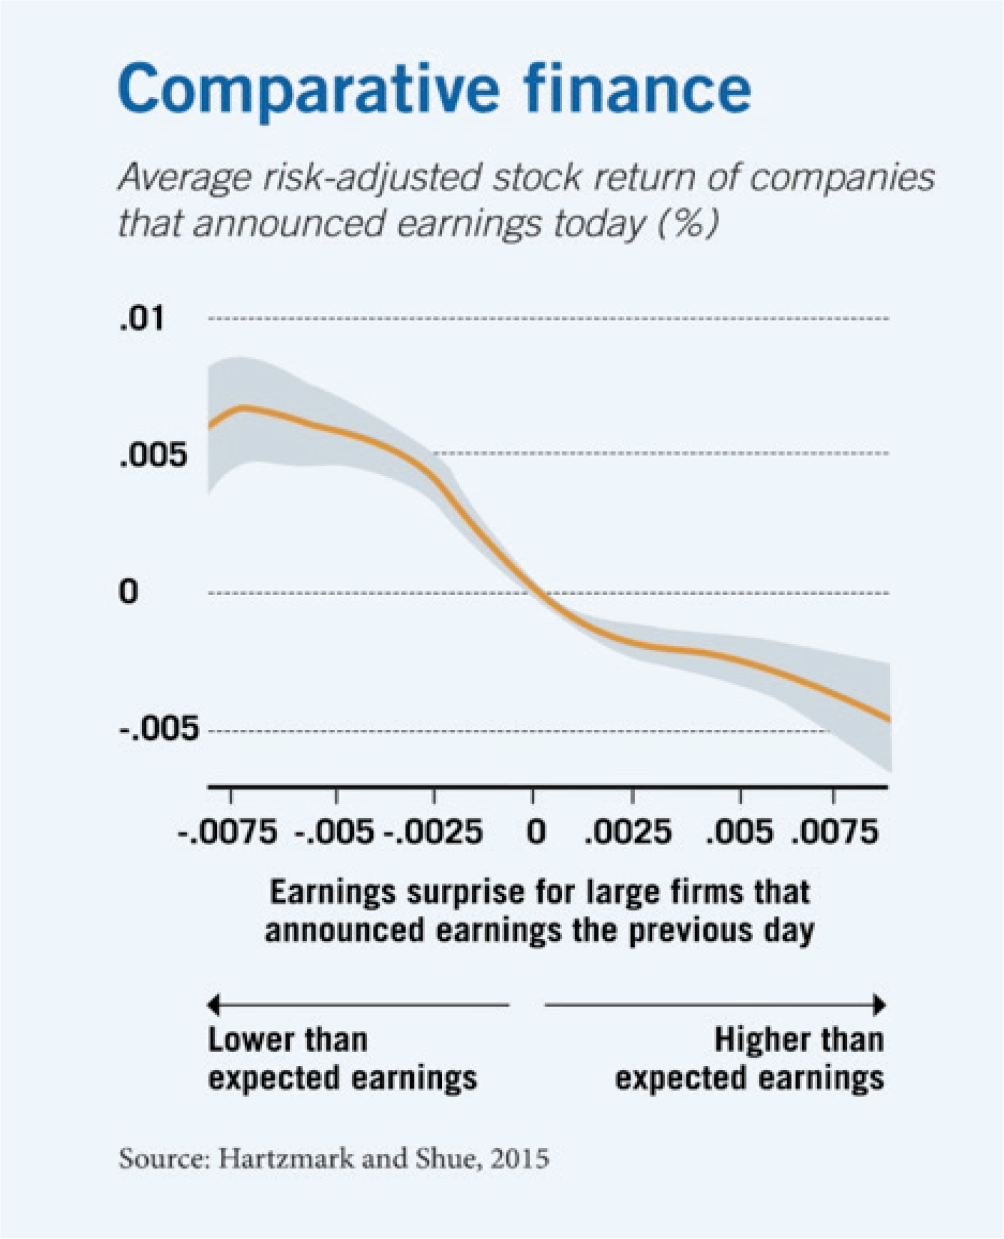 A line chart plotting the average risk-adjusted stock return of companies that announced earnings today, with percentages on the y-axis and a measure of earnings expectations on the x-axis. The line starts at the top left, with a higher return of about zero-point-zero-zero-five for large companies with lower than expected yearnings and drops to about negative zero-point-zero-zero-five for those with higher than expected earnings.